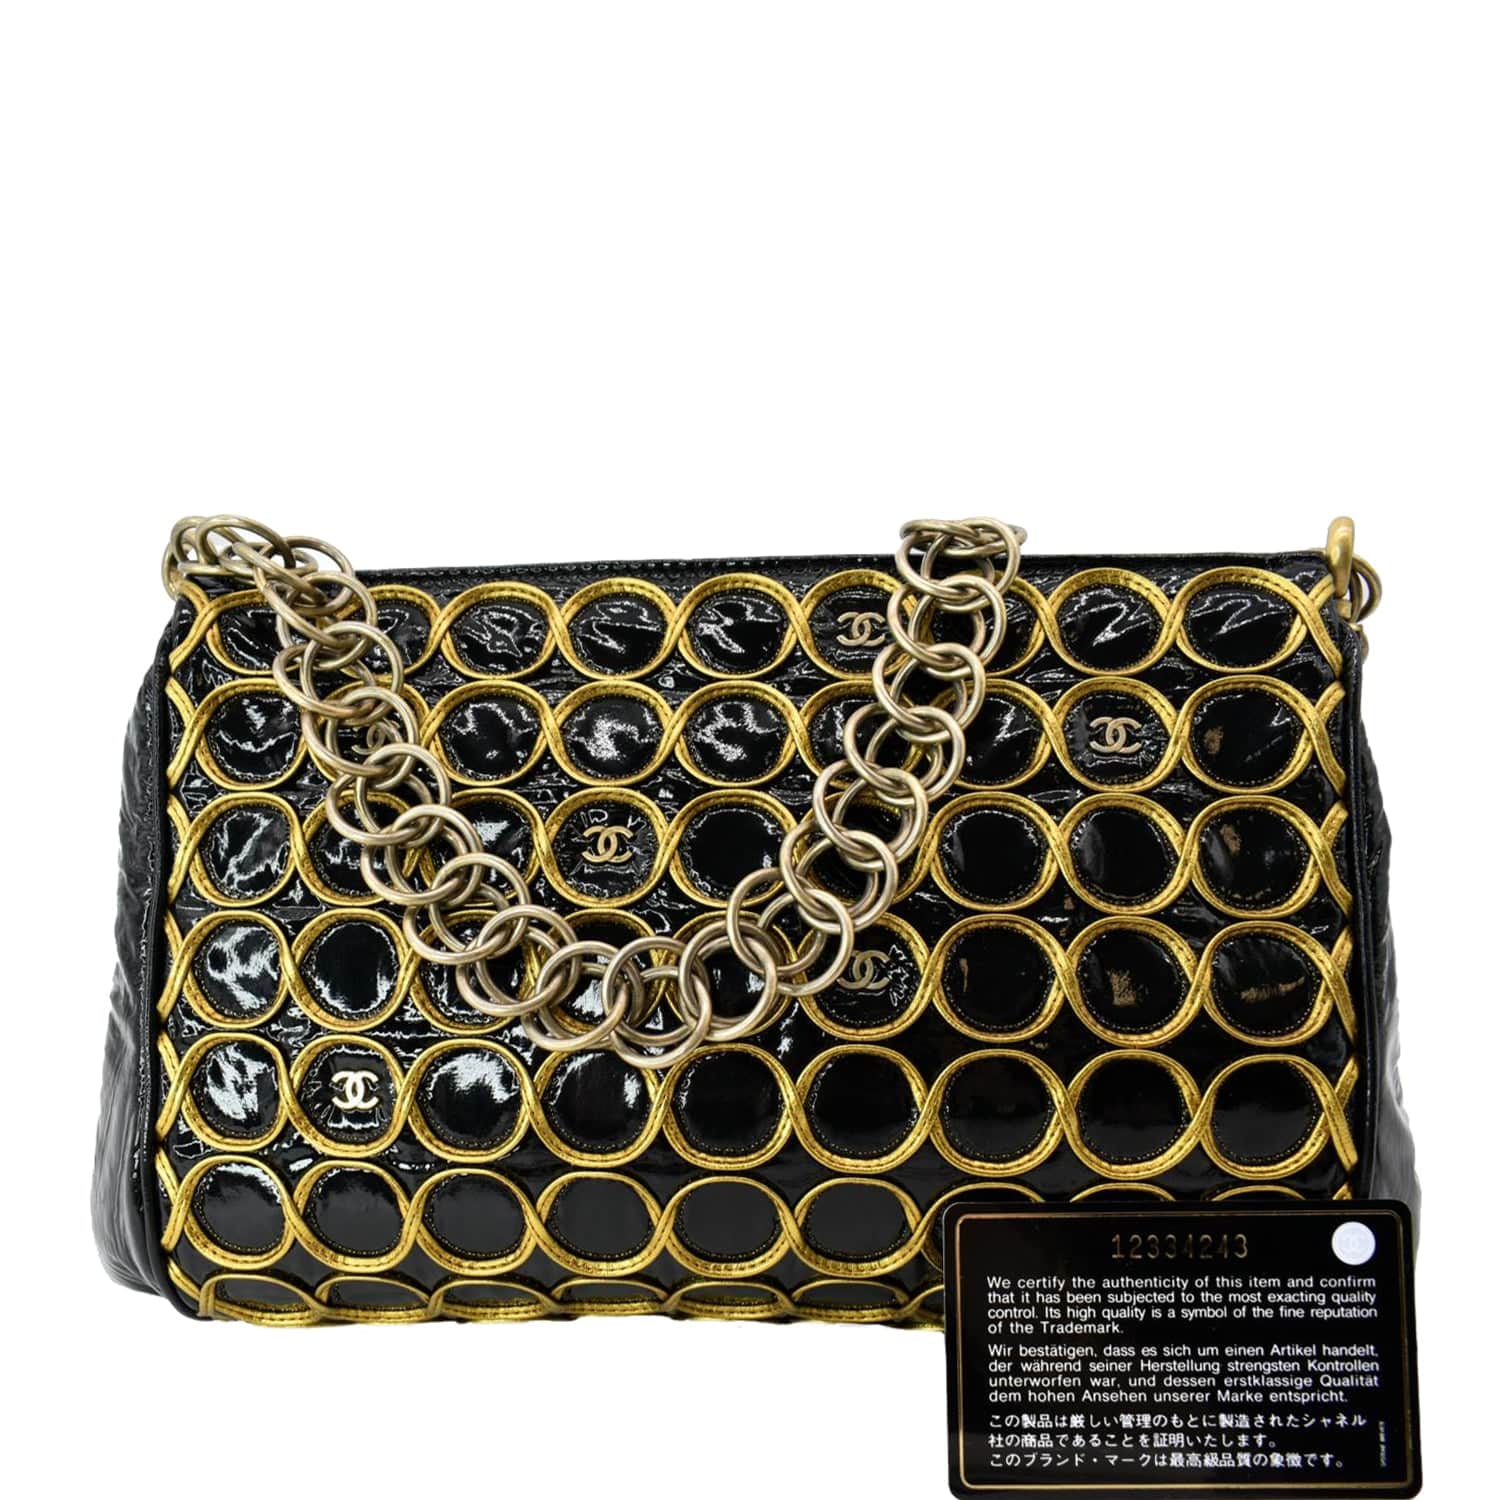 Chanel Patent New Clutch - Handle Bags, Handbags